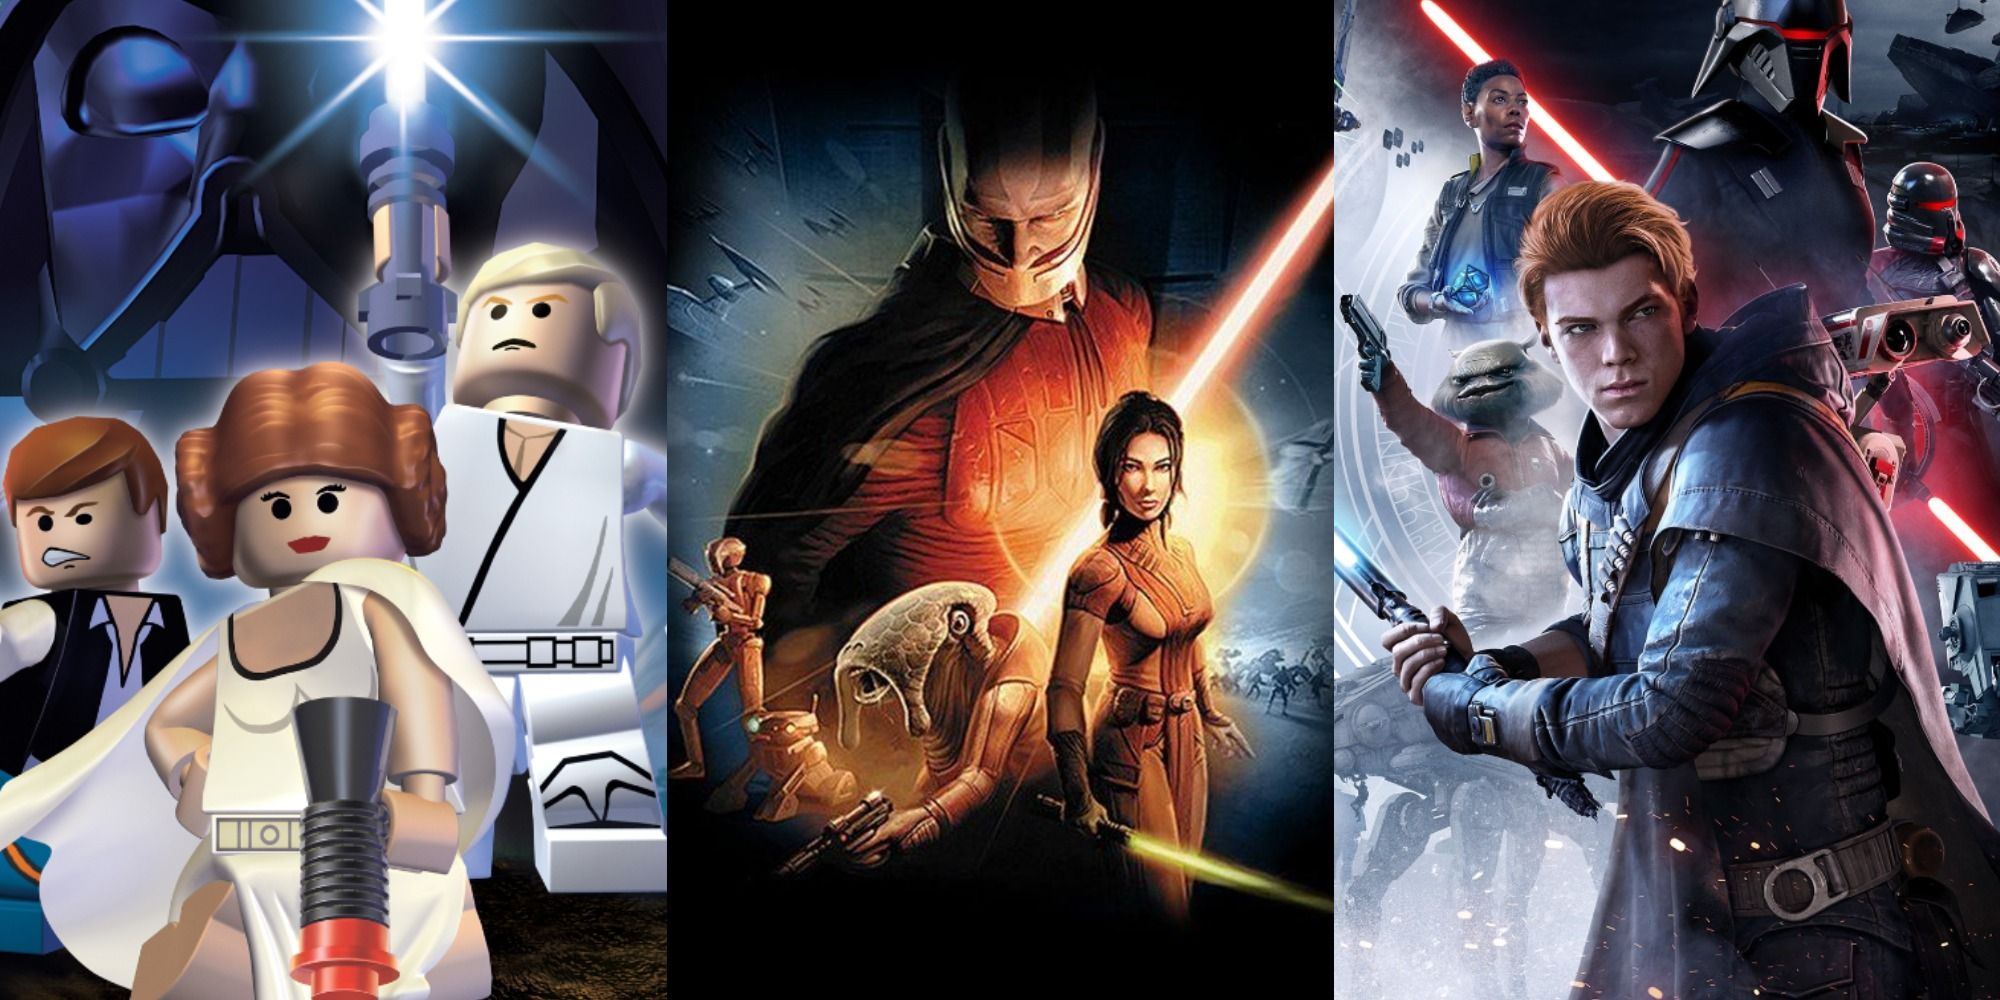 Split image of box art for Lego Star Wars Original Trilogy, Knights of the Old Republic and Jedi Fallen Order